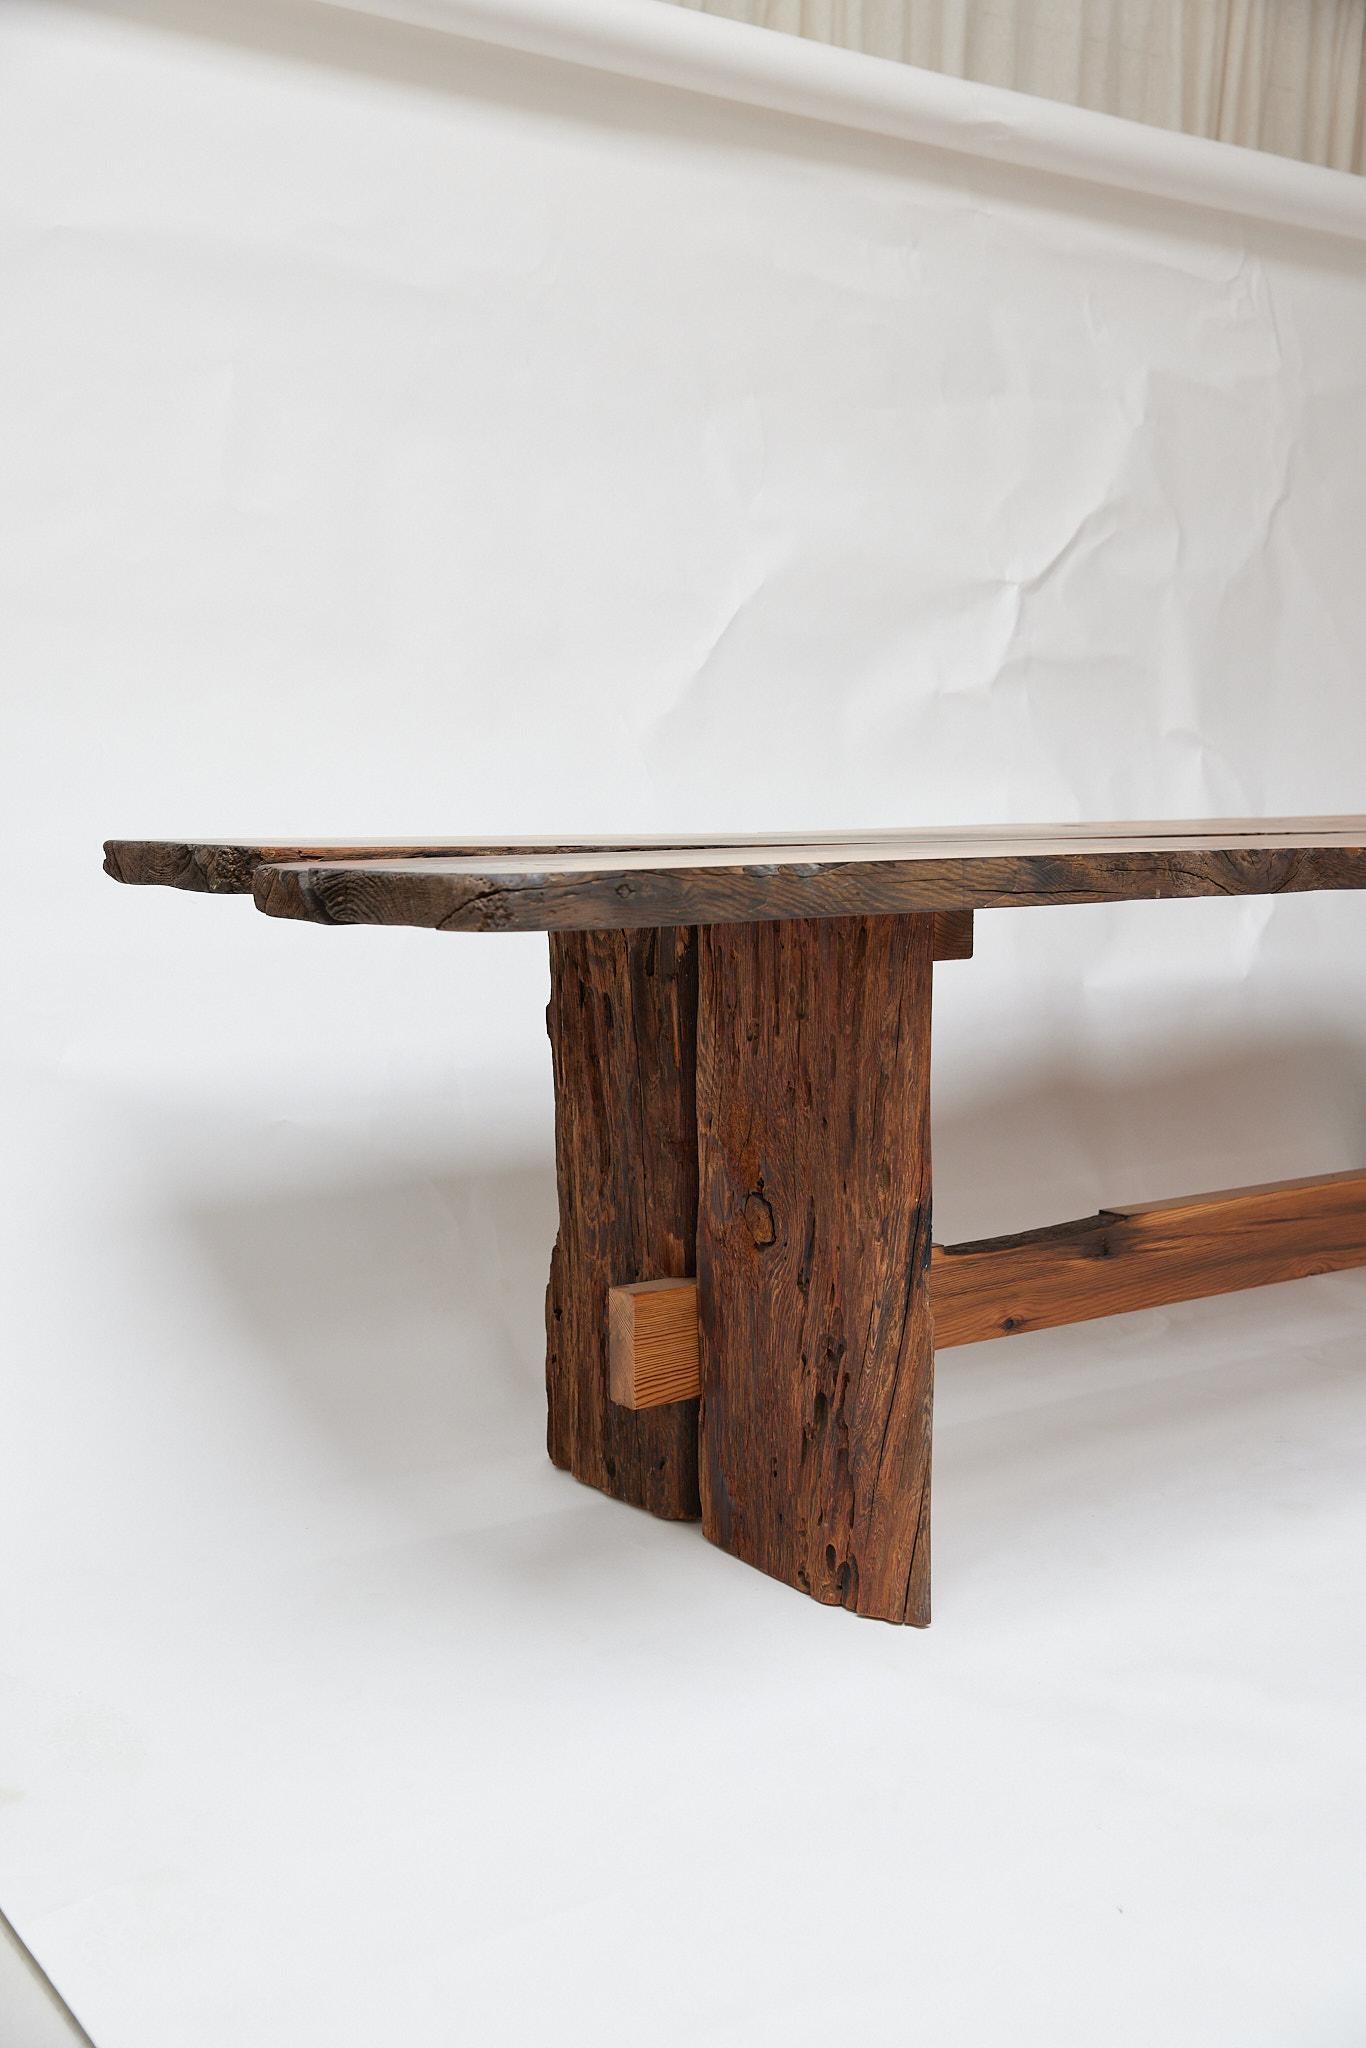 Unique plank table made at fine cabinetmaker, Malte Goermsen''s, workshop just outside of Copenhagen. The table is made from historical wood,  Pomerian Pine,  from 1801. 

Some years ago, cabinet maker Malte Gormsen stumbled upon some piles of